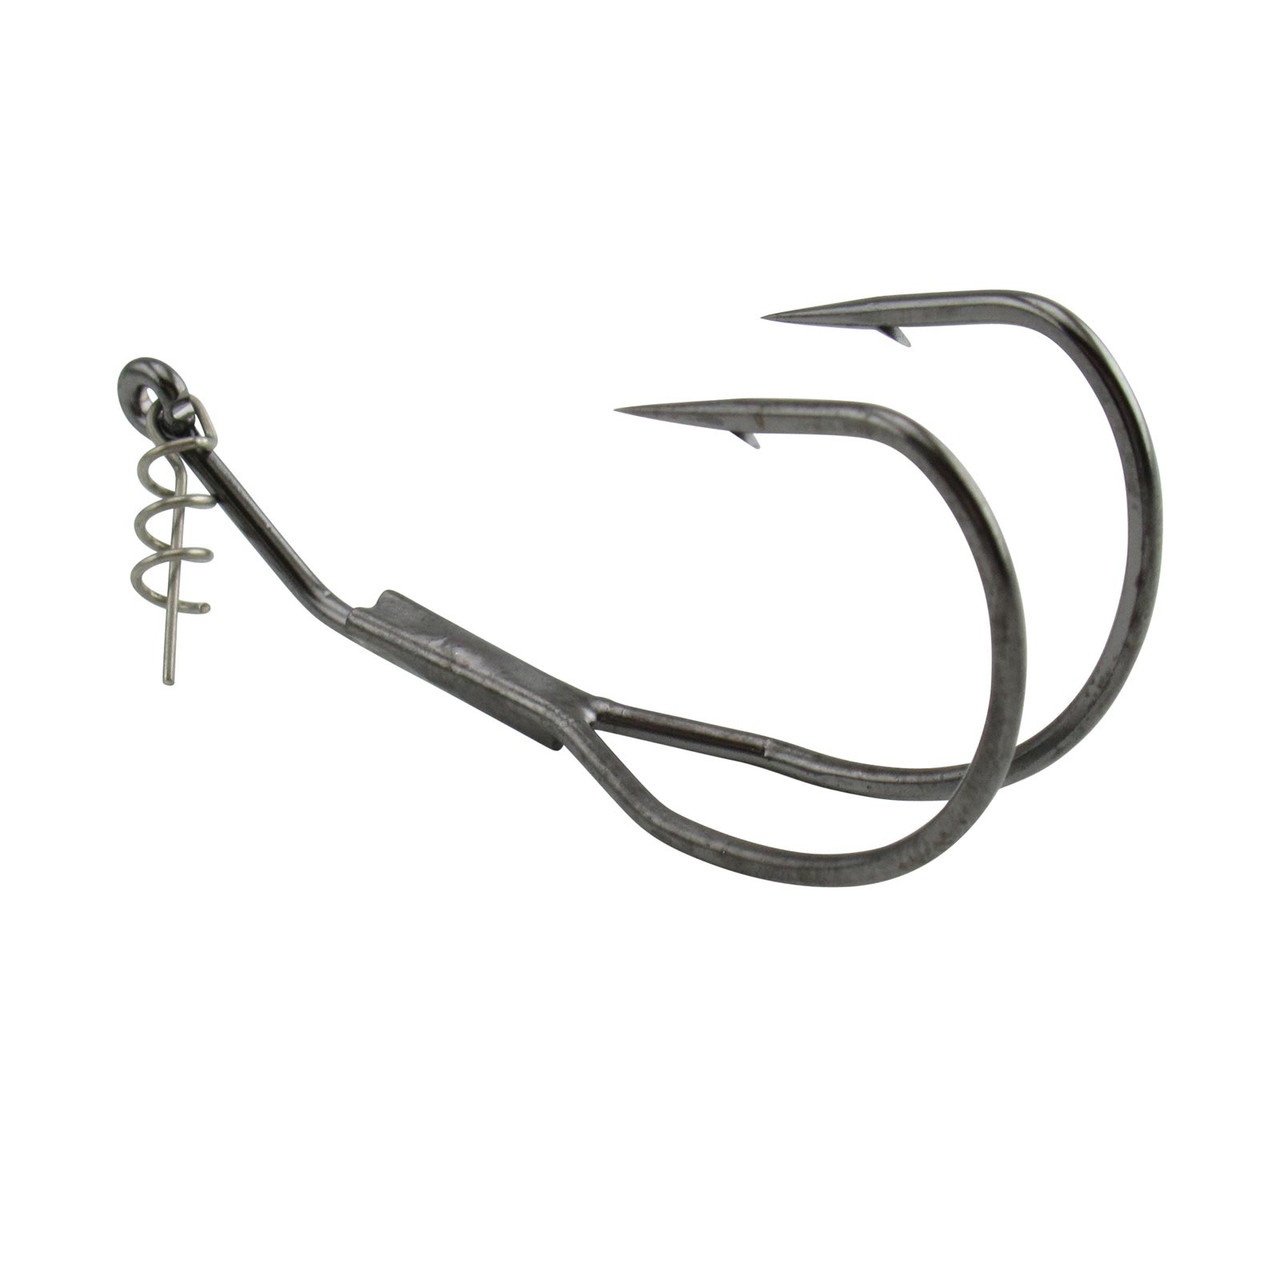  Owner American 5624-155 Double Toad Bass Hook, Size 5/0,  Needle Point, V, Multi, One Size : Fishing Hooks : Sports & Outdoors